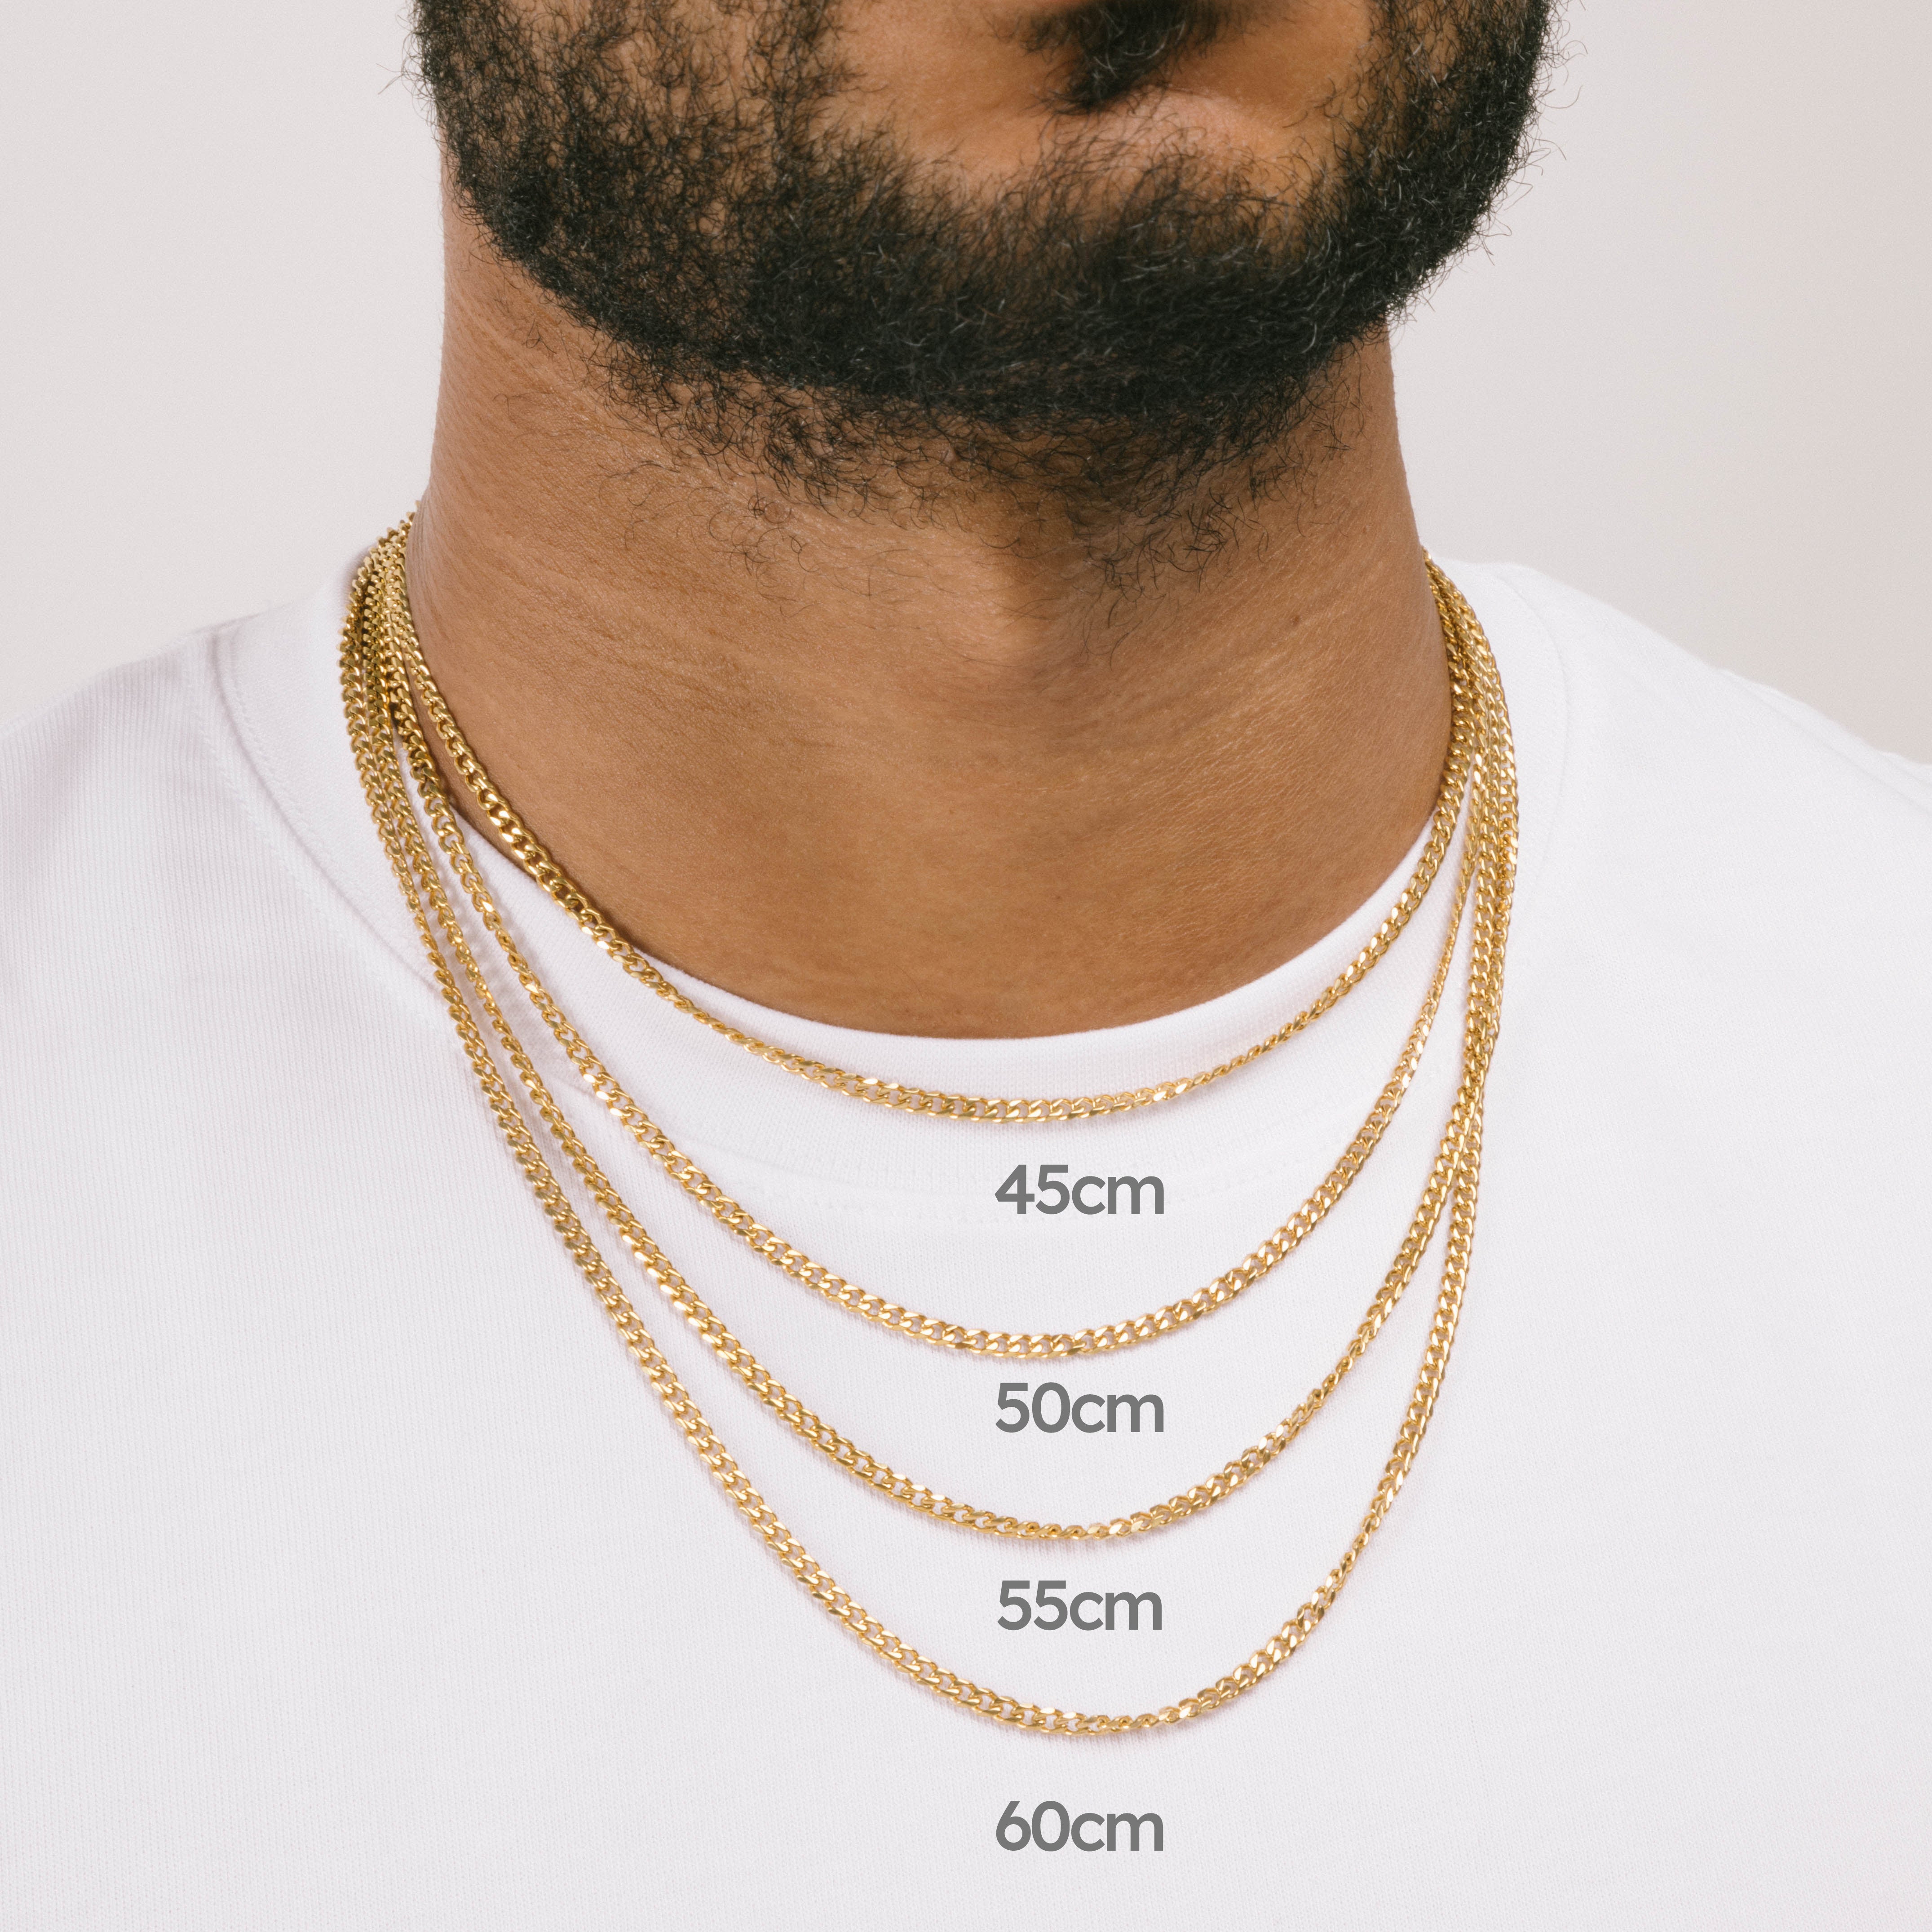 A model wearing the Cuban Chain in Gold is crafted from 18K Gold Plated material and is non-tarnish, water-resistant, and designed to be hypoallergenic.